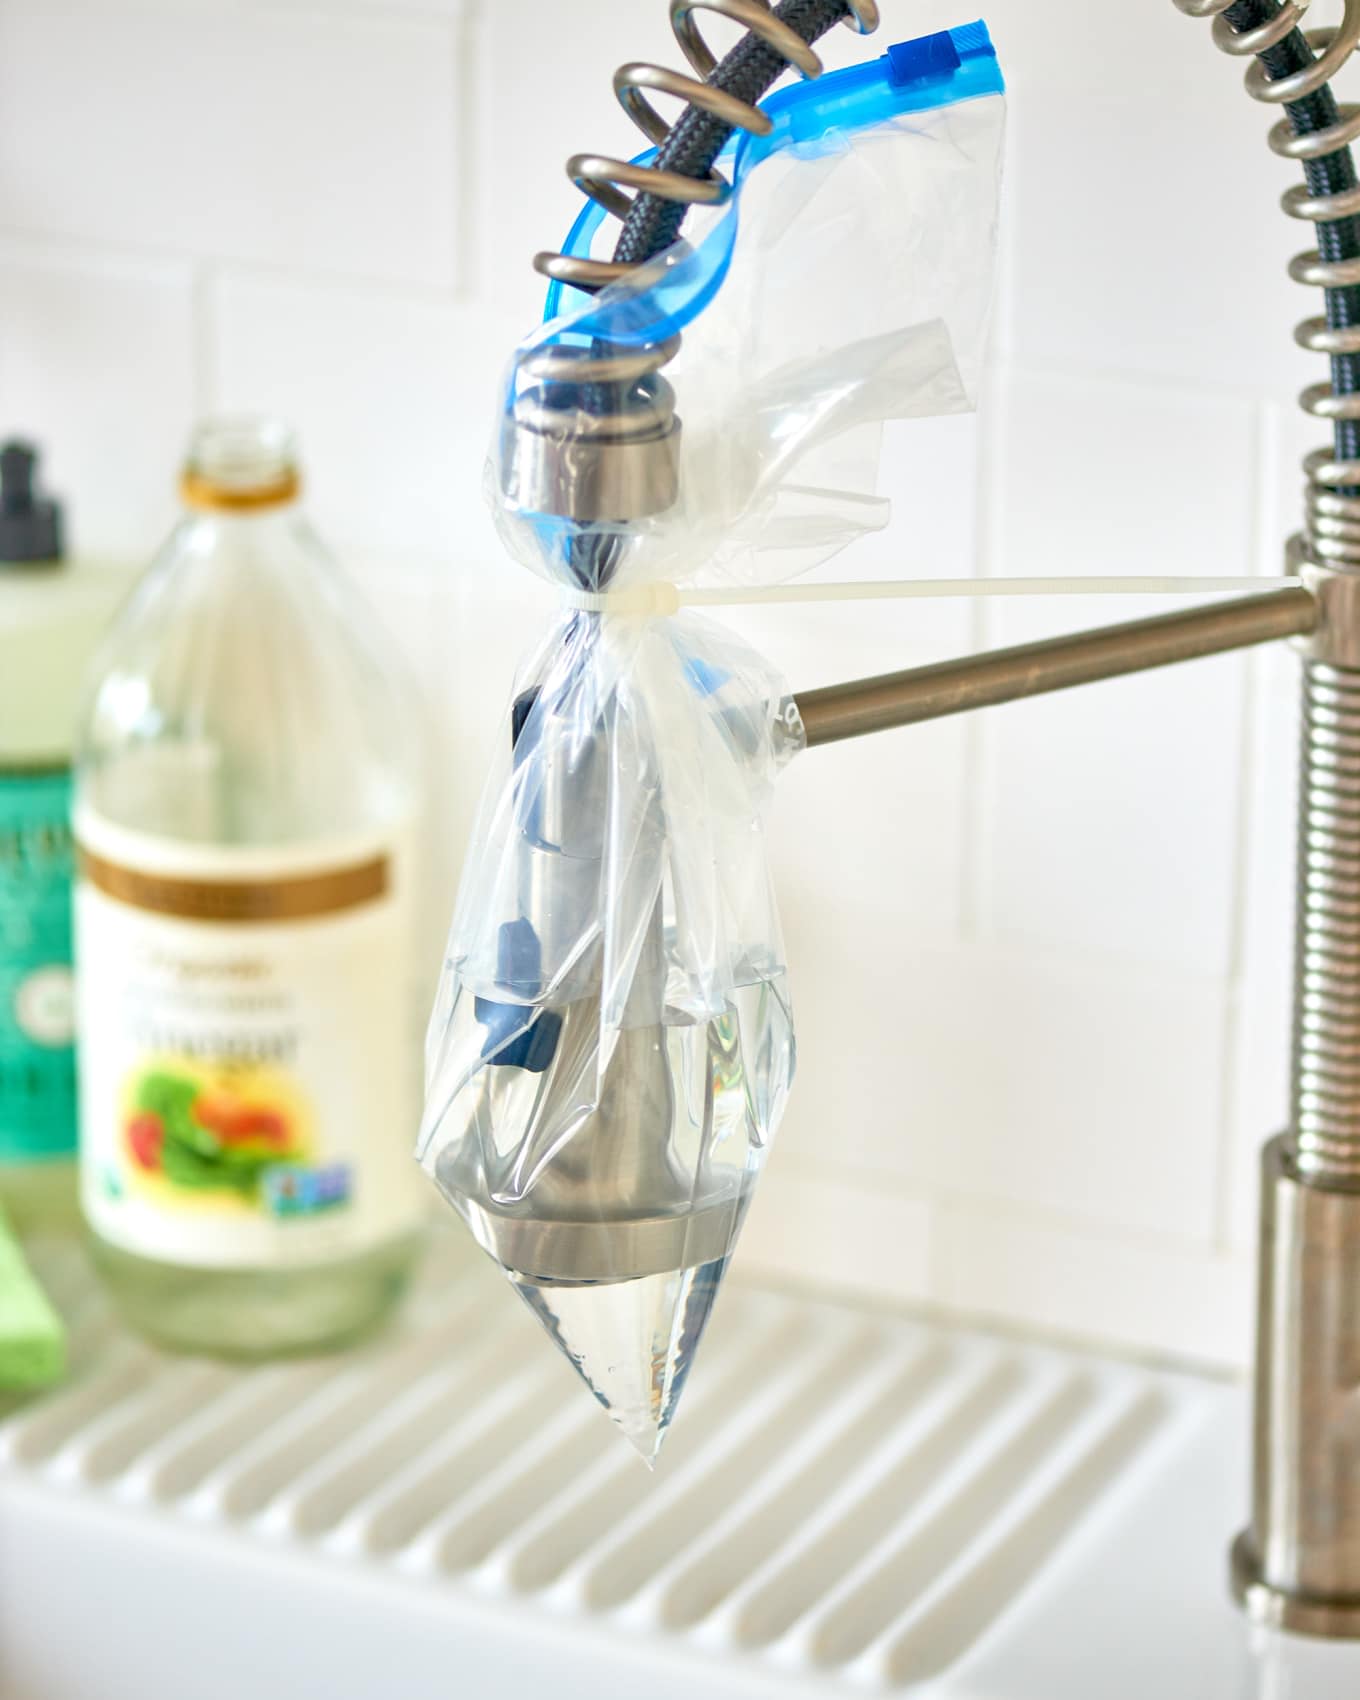 How To Clean Faucet Head How to Clean a Faucet Head with Vinegar: A Clever Hack | Apartment Therapy